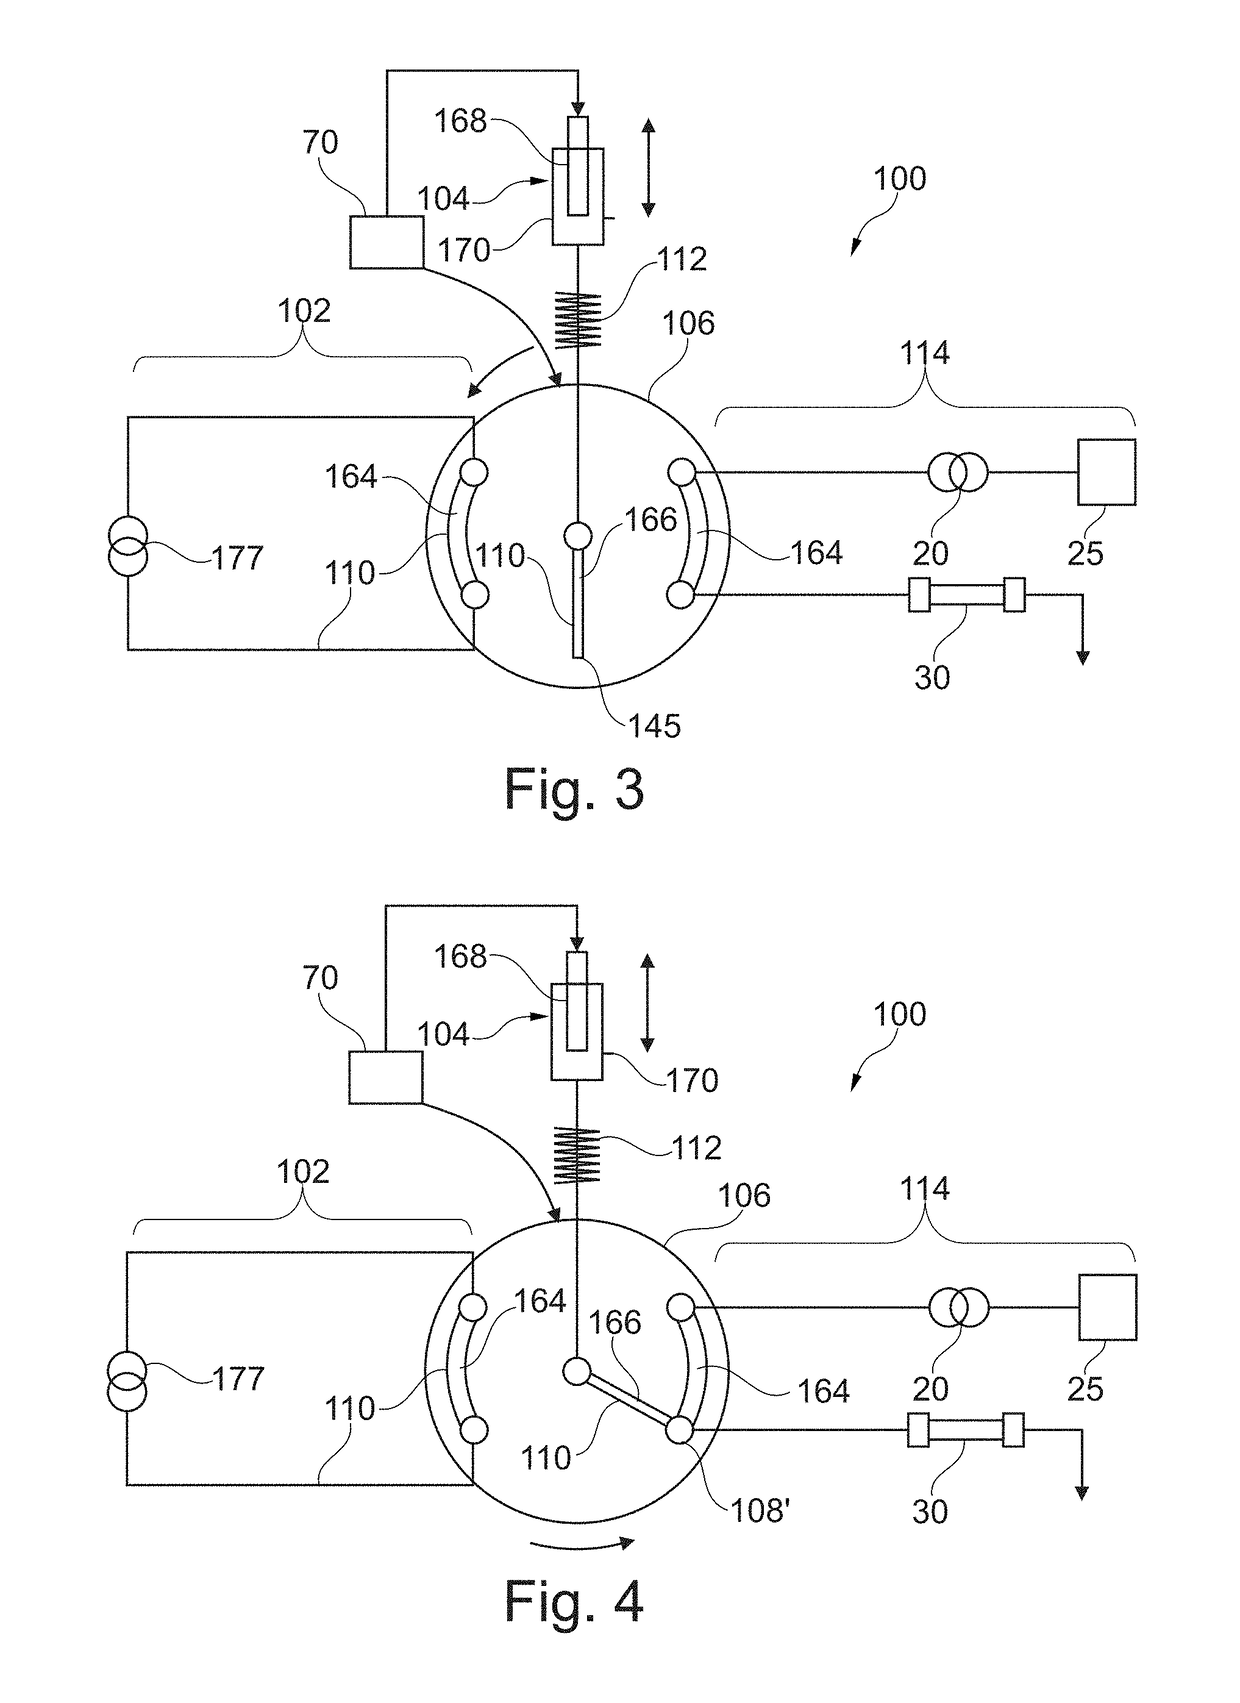 Branching off fluidic sample with low influence on source flow path